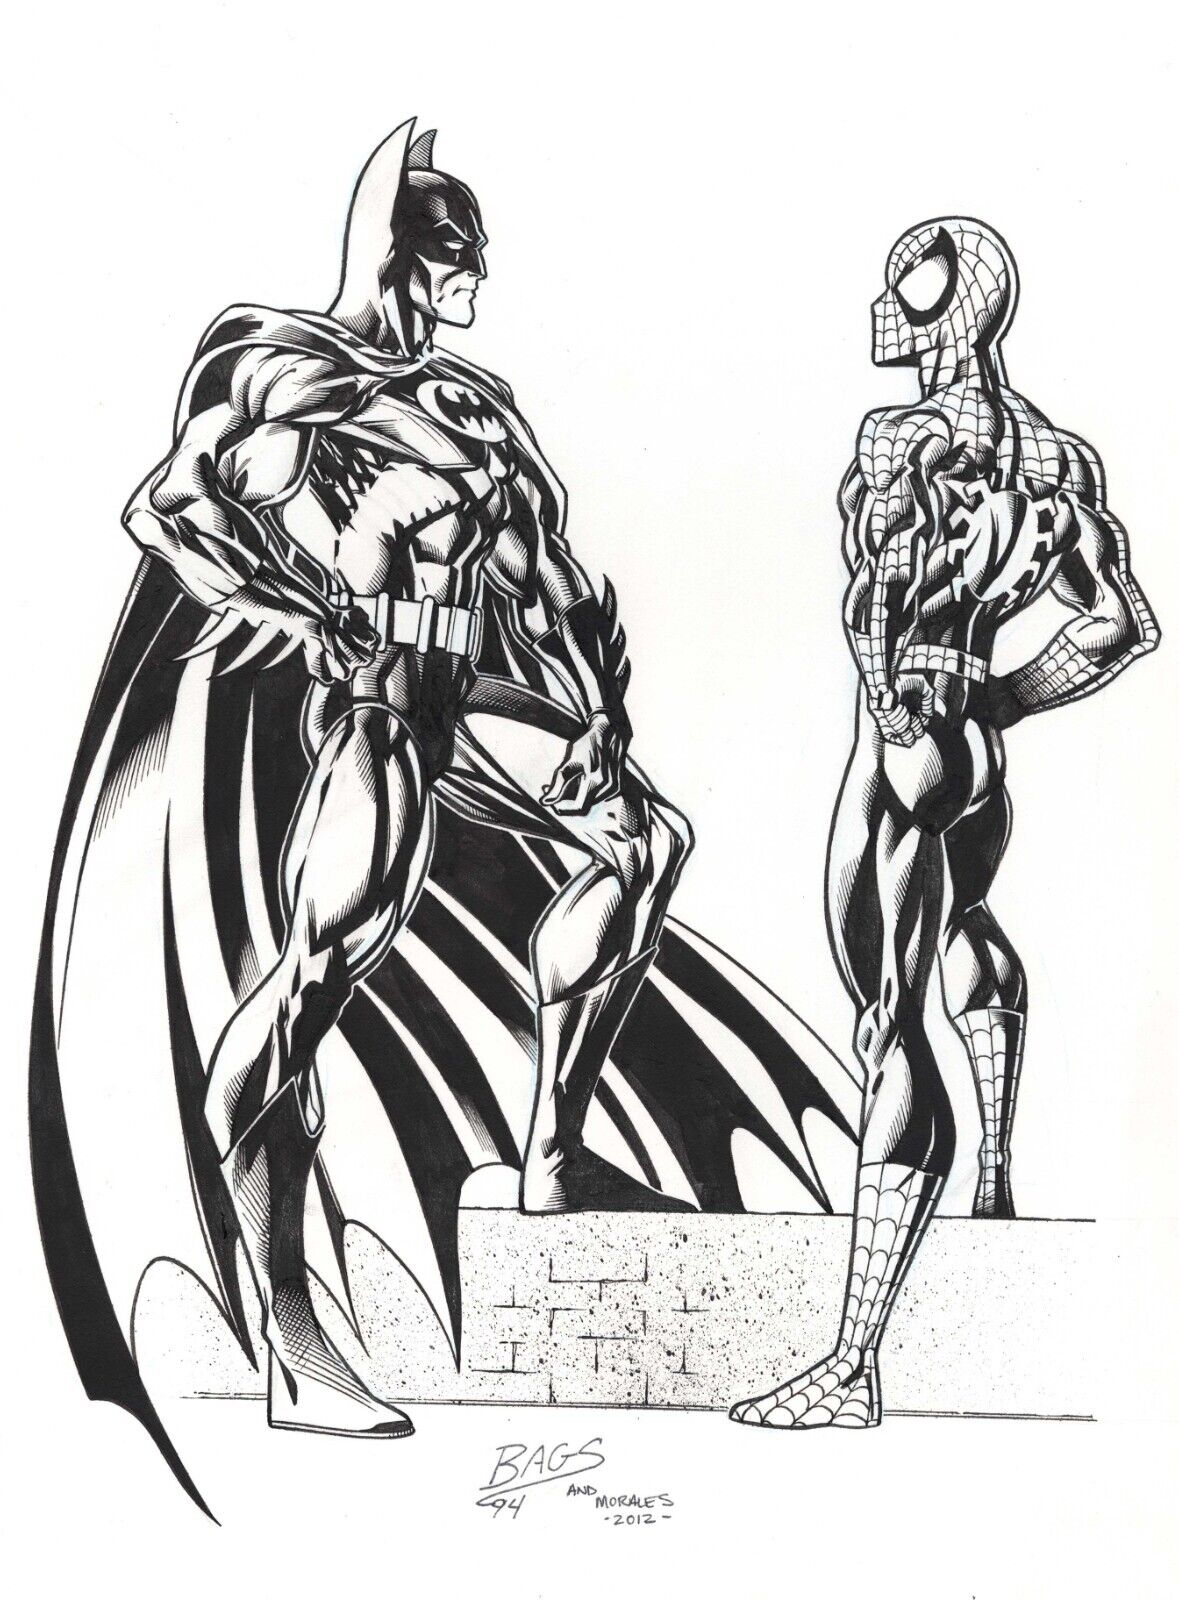 MARK BAGLEY BATMAN AND SPIDER-MAN ILLUSTRATION INCREDIBLE PIECE OF ART 9x13 WOW